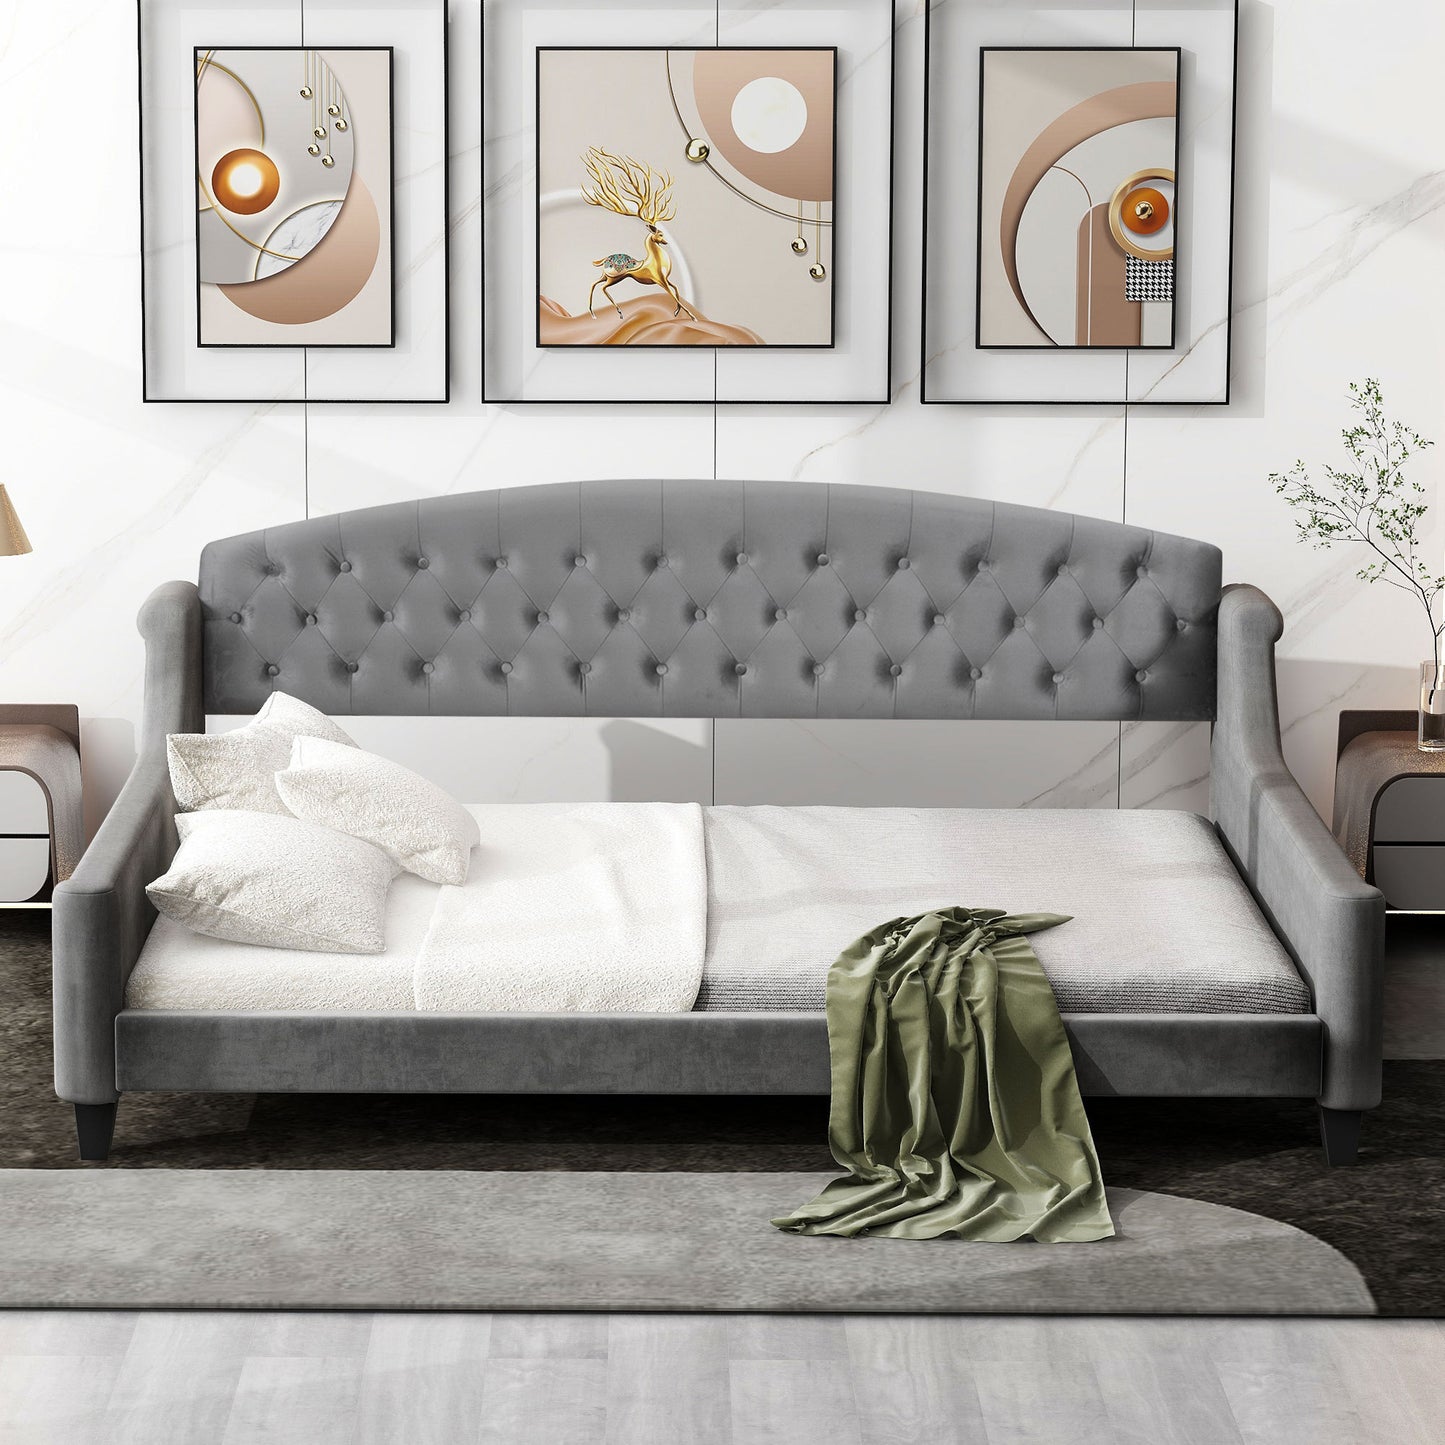 Modern Luxury Tufted Button Daybed, Full, Gray